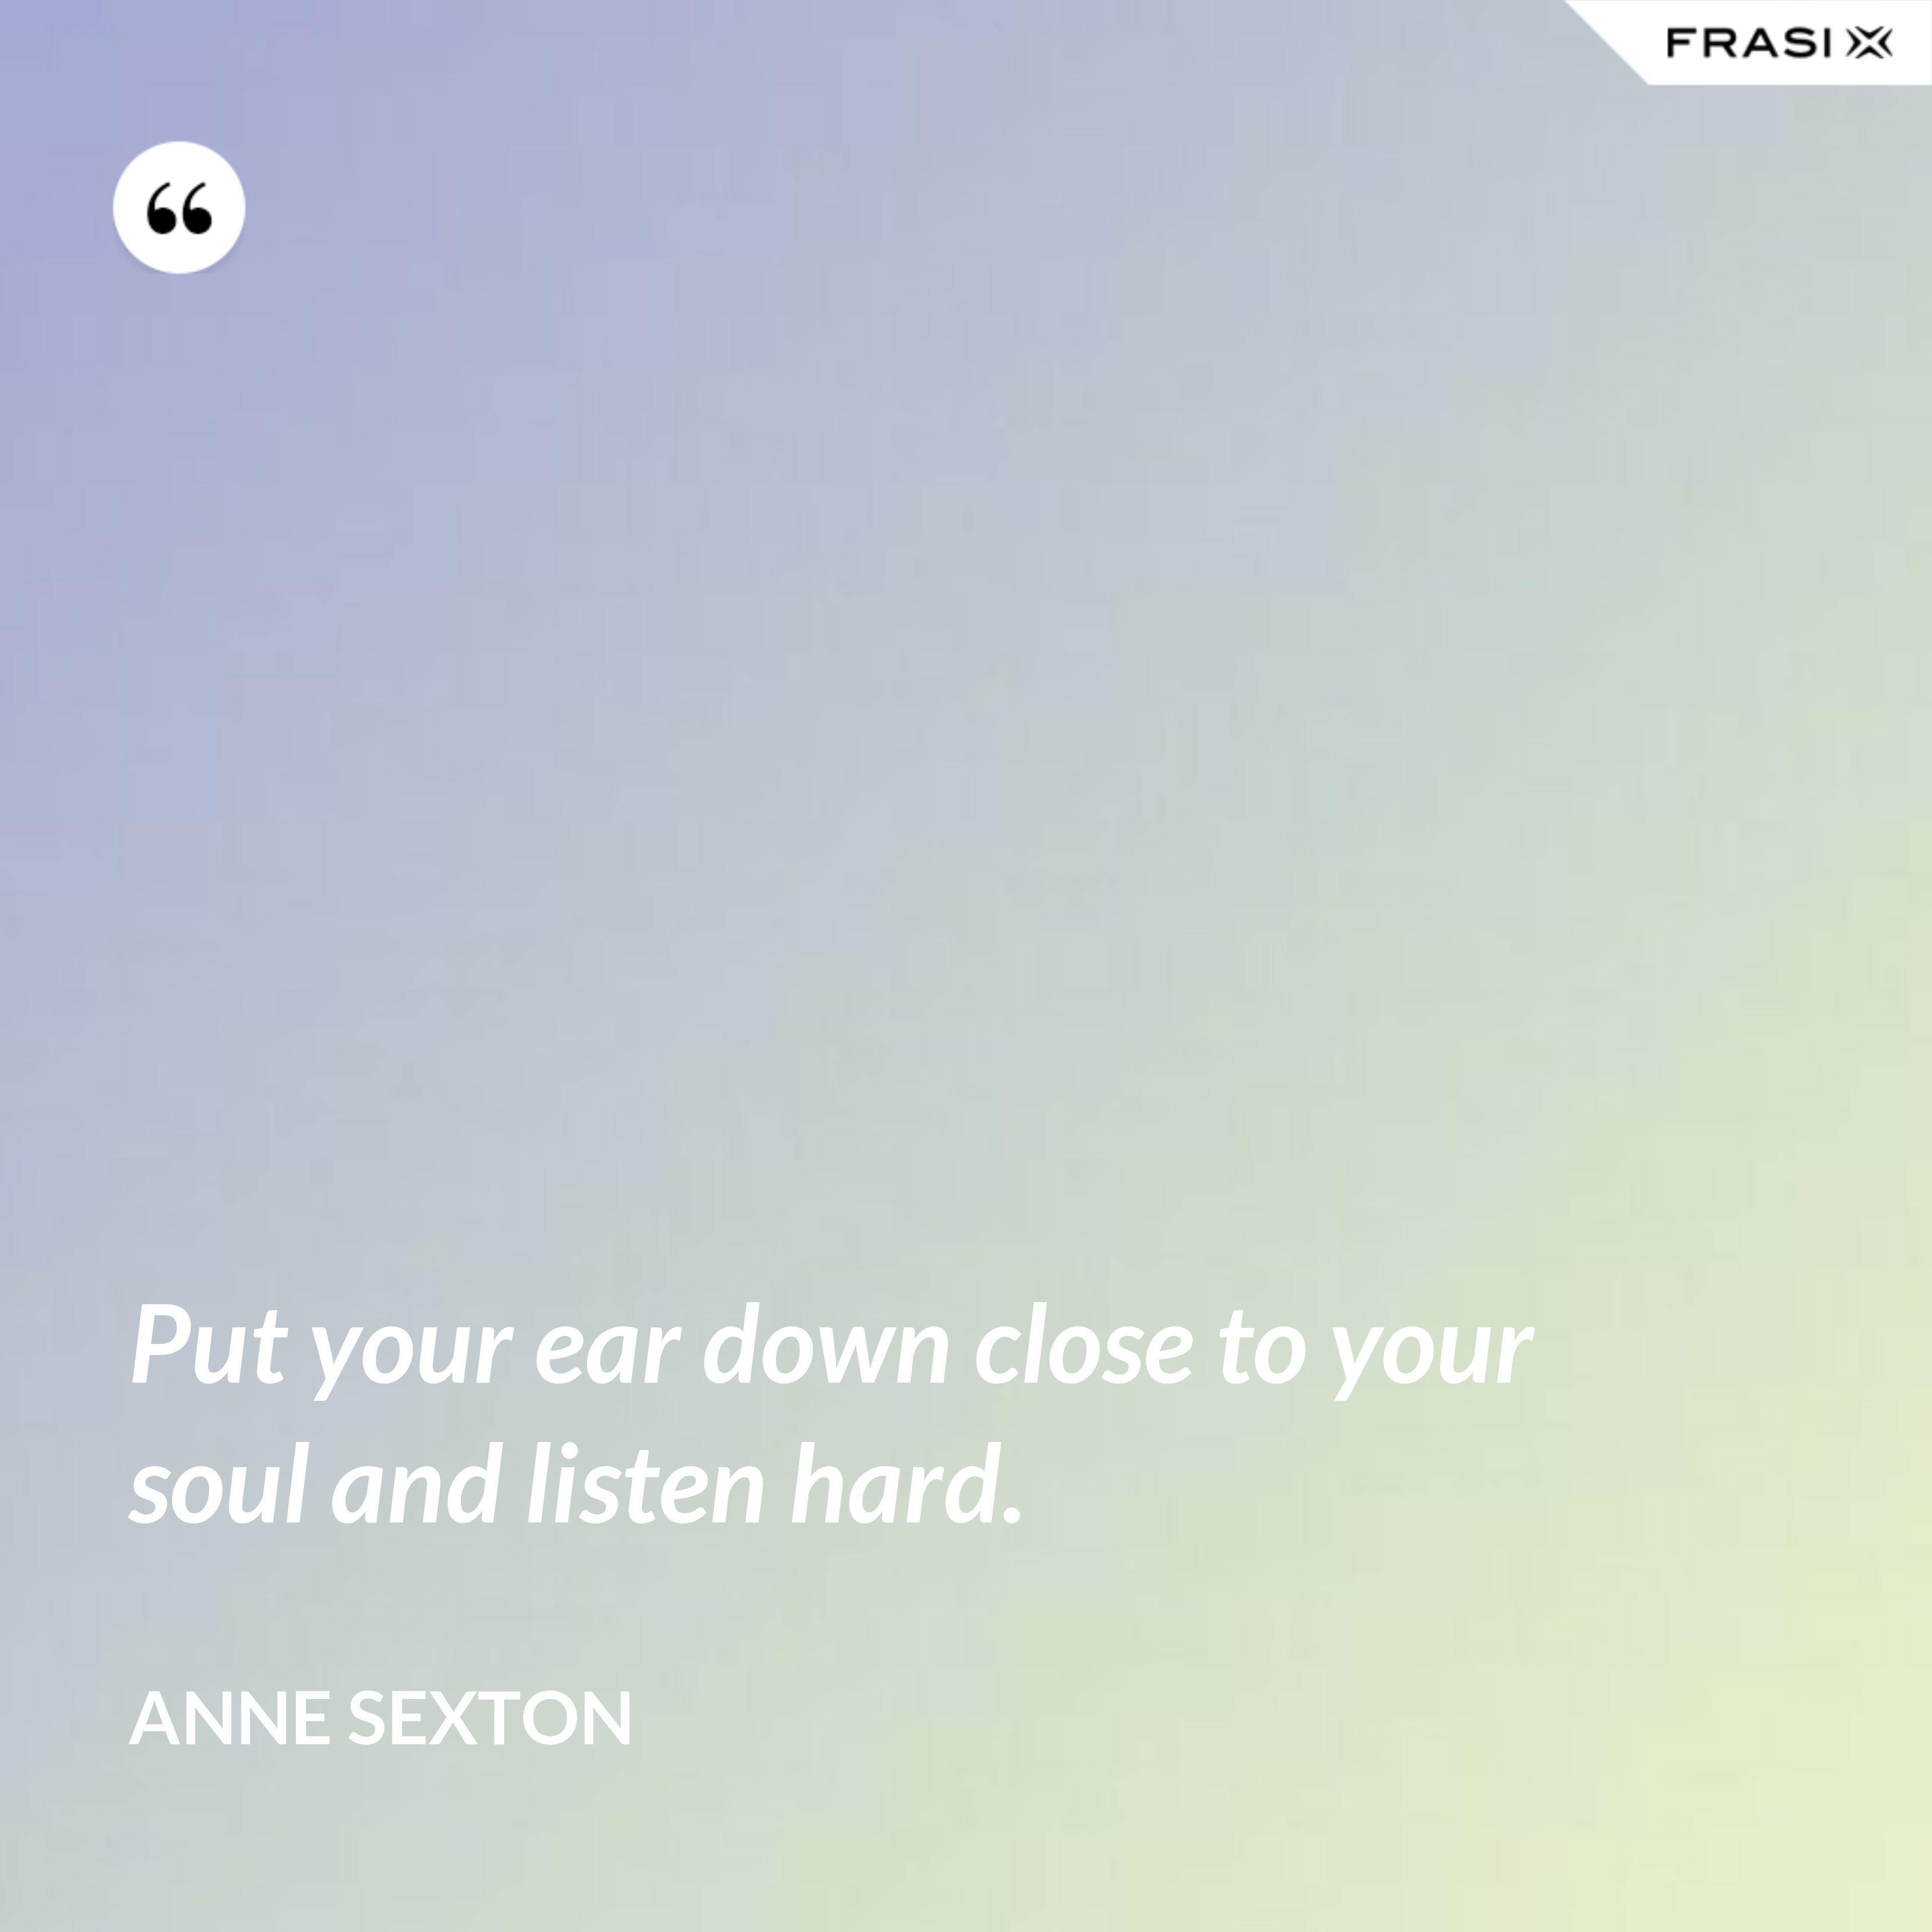 Put your ear down close to your soul and listen hard. - Anne Sexton